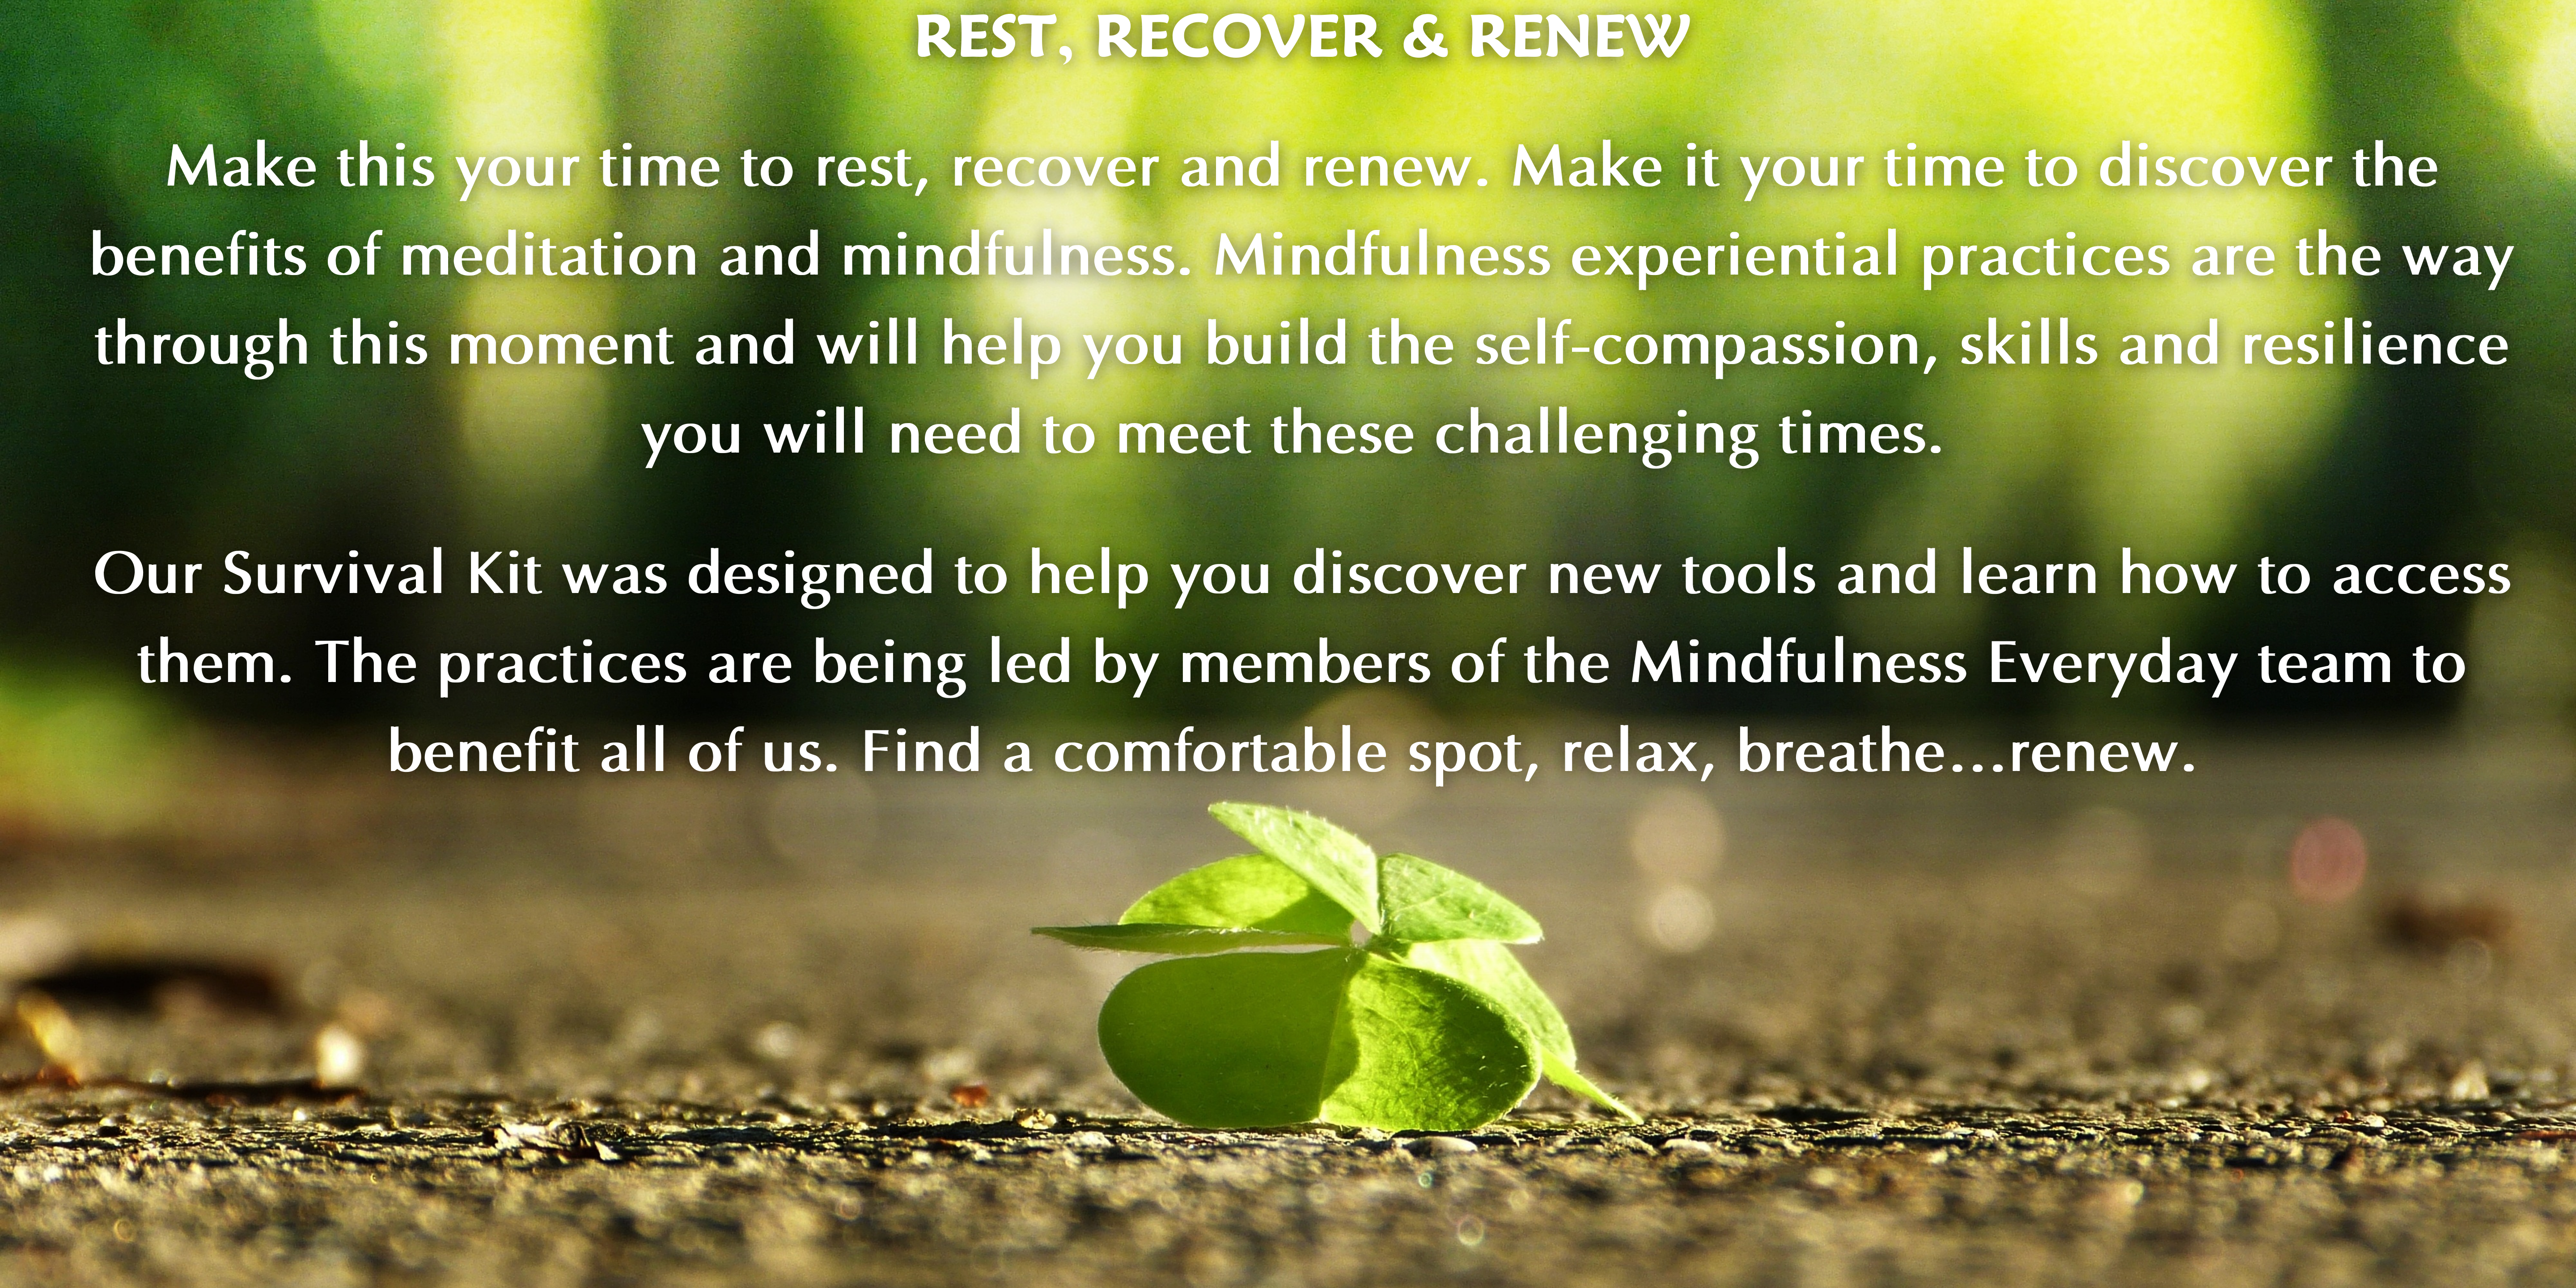 REST, RECOVER & RENEW


Make this your time to rest, recover and renew. Make it your time to discover the benefits of meditation and mindfulness. Mindfulness experiential practices are the way through this moment and will help you build the self-compassion, skills and resilience you will need to meet these challenging times. 
Our ME Survive to Thrive Kit was designed to help you discover new tools and learn how to access them. The practices are being led by members of the Mindfulness Everyday team to benefit all of us. Find a comfortable spot, relax, breathe…renew. 